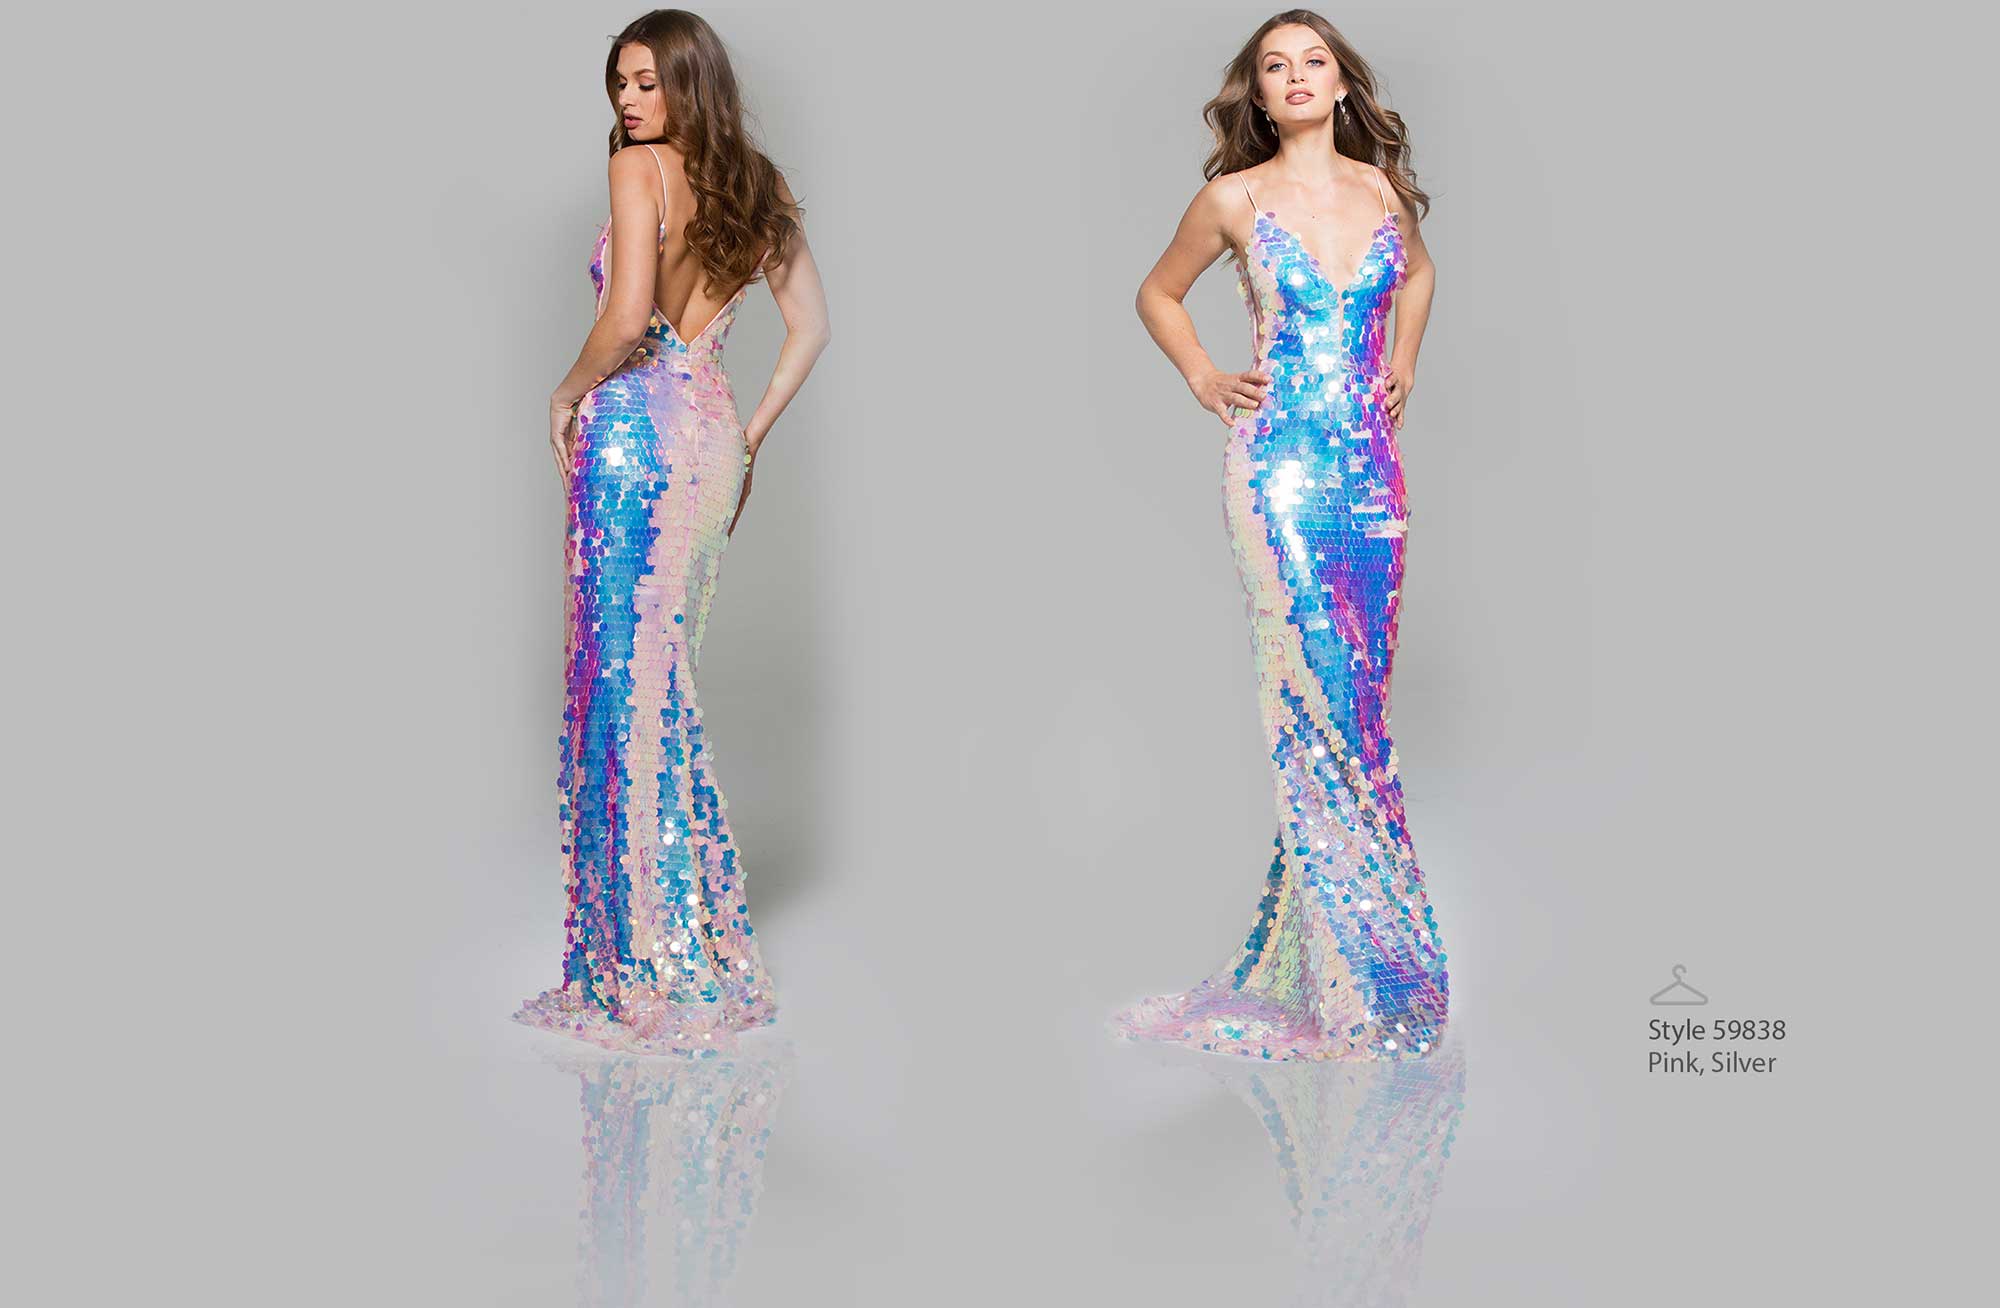 jovani gown prices